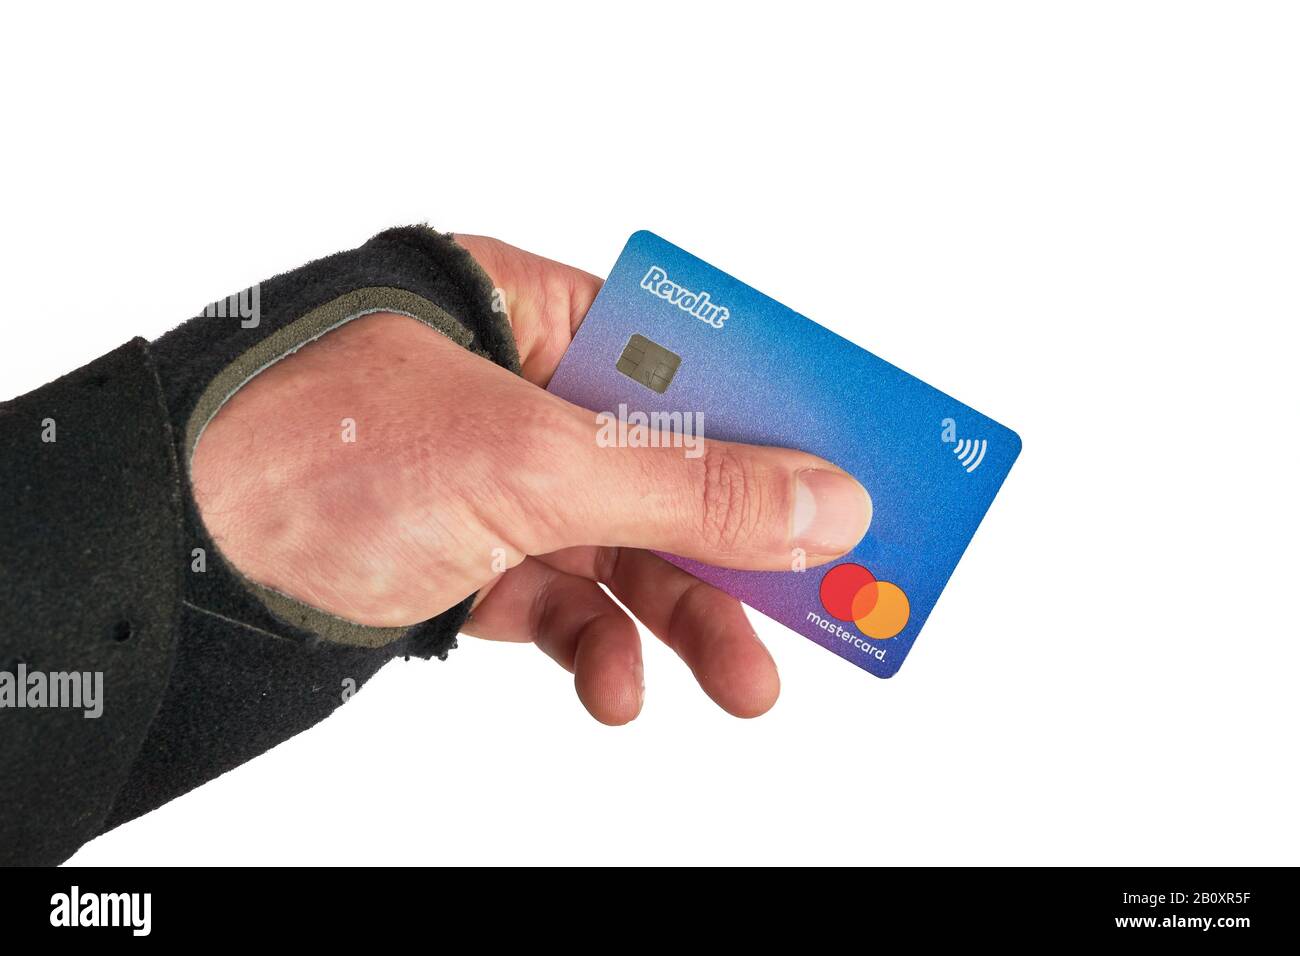 Bucharest, Romania - April 13, 2019: Revolut Master card between the fingers of a hand wearing a wrist brace, after a ski injury. Stock Photo